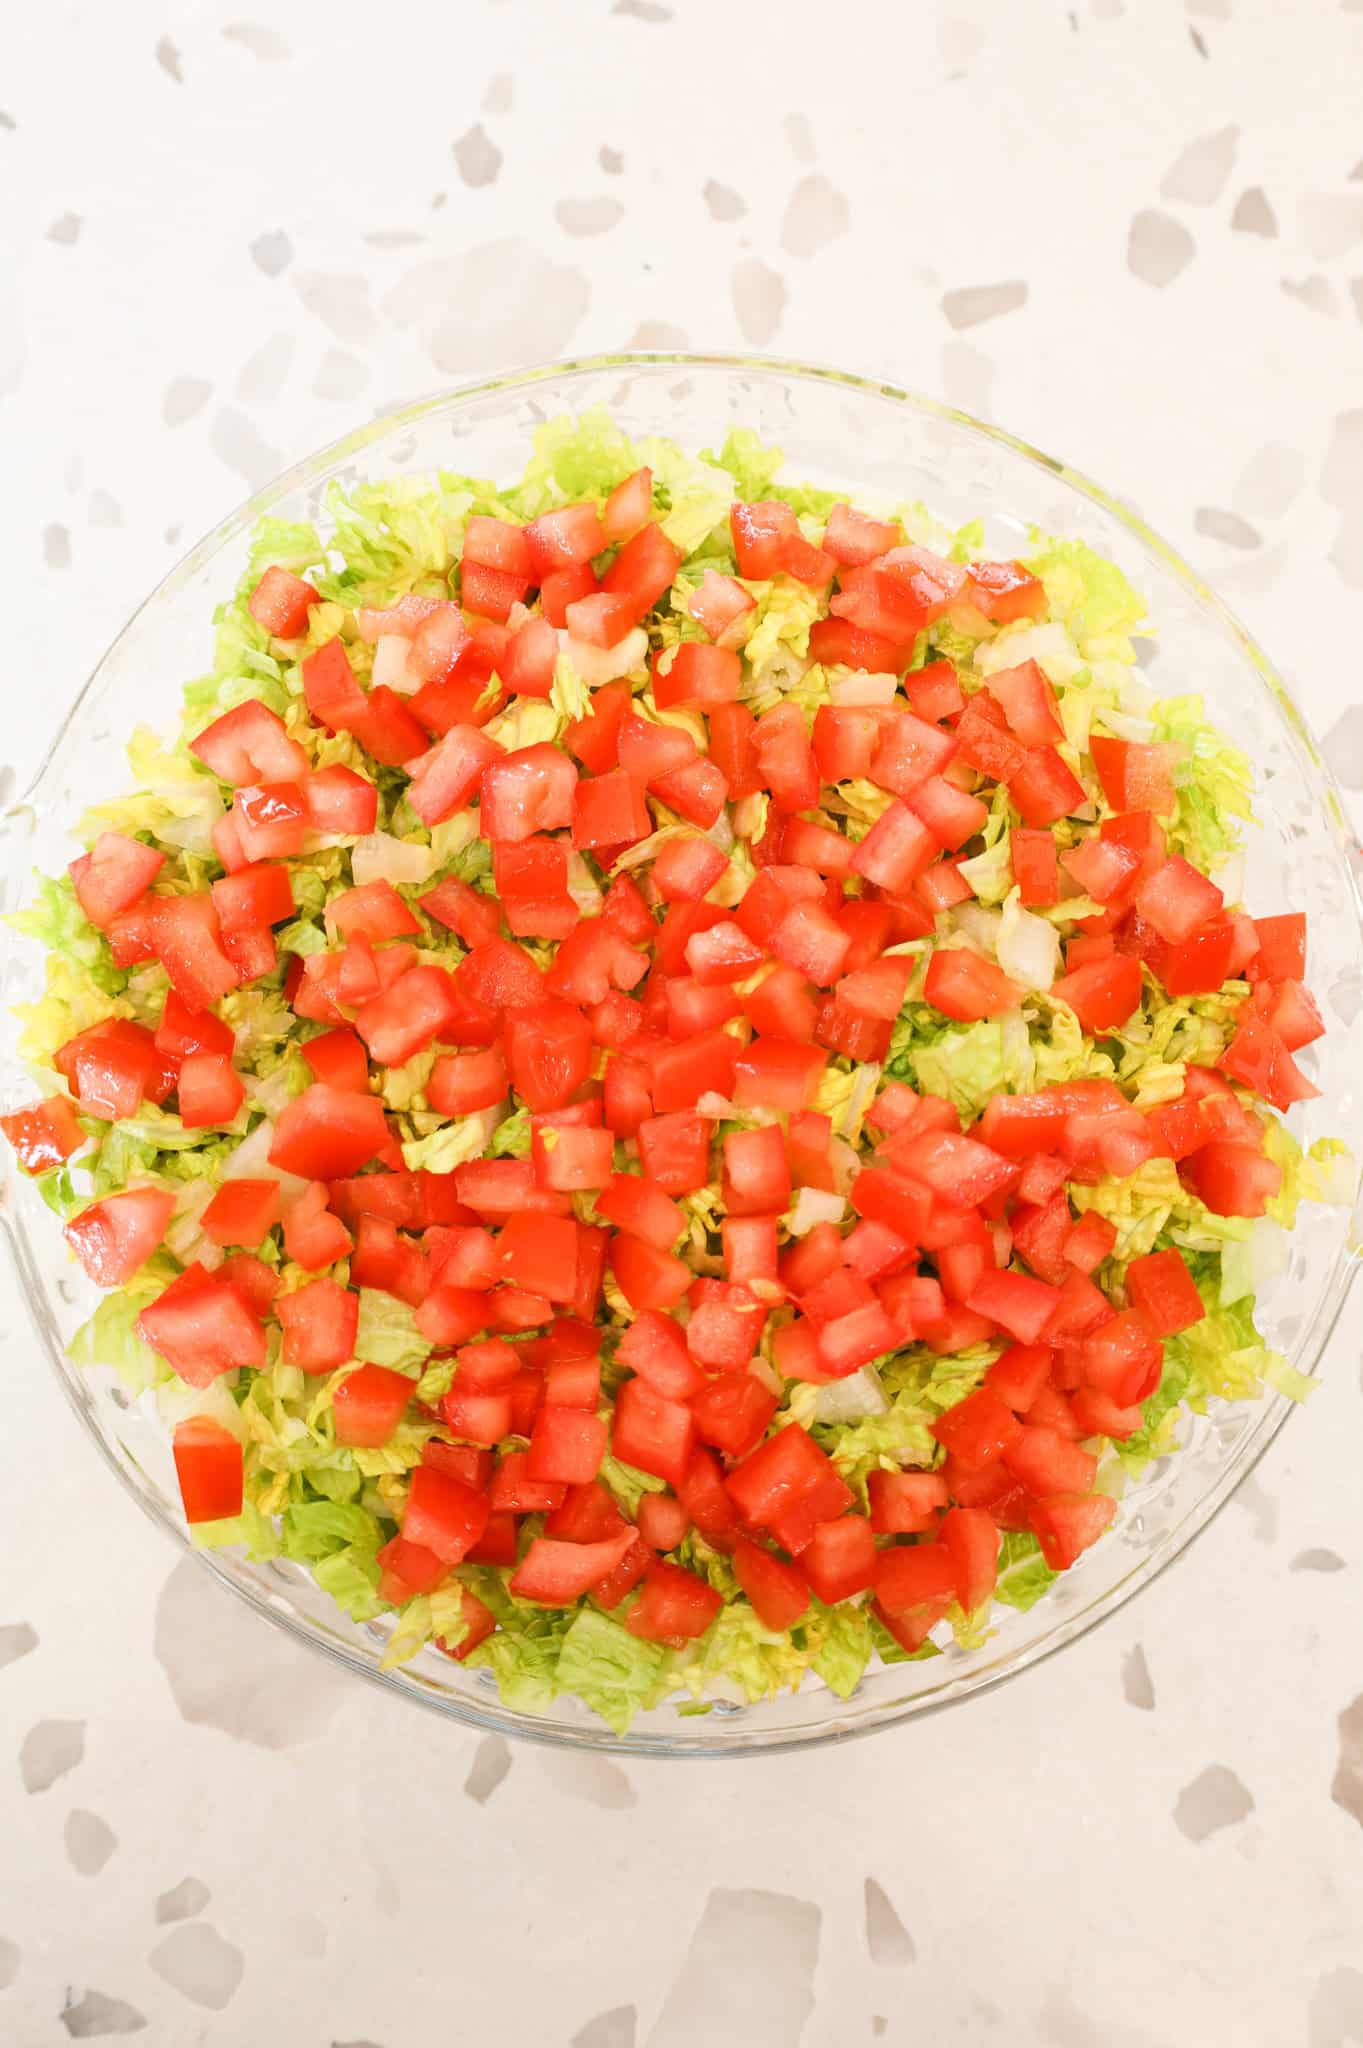 diced tomatoes and chopped lettuce on top of mayo mixture in a pie plate